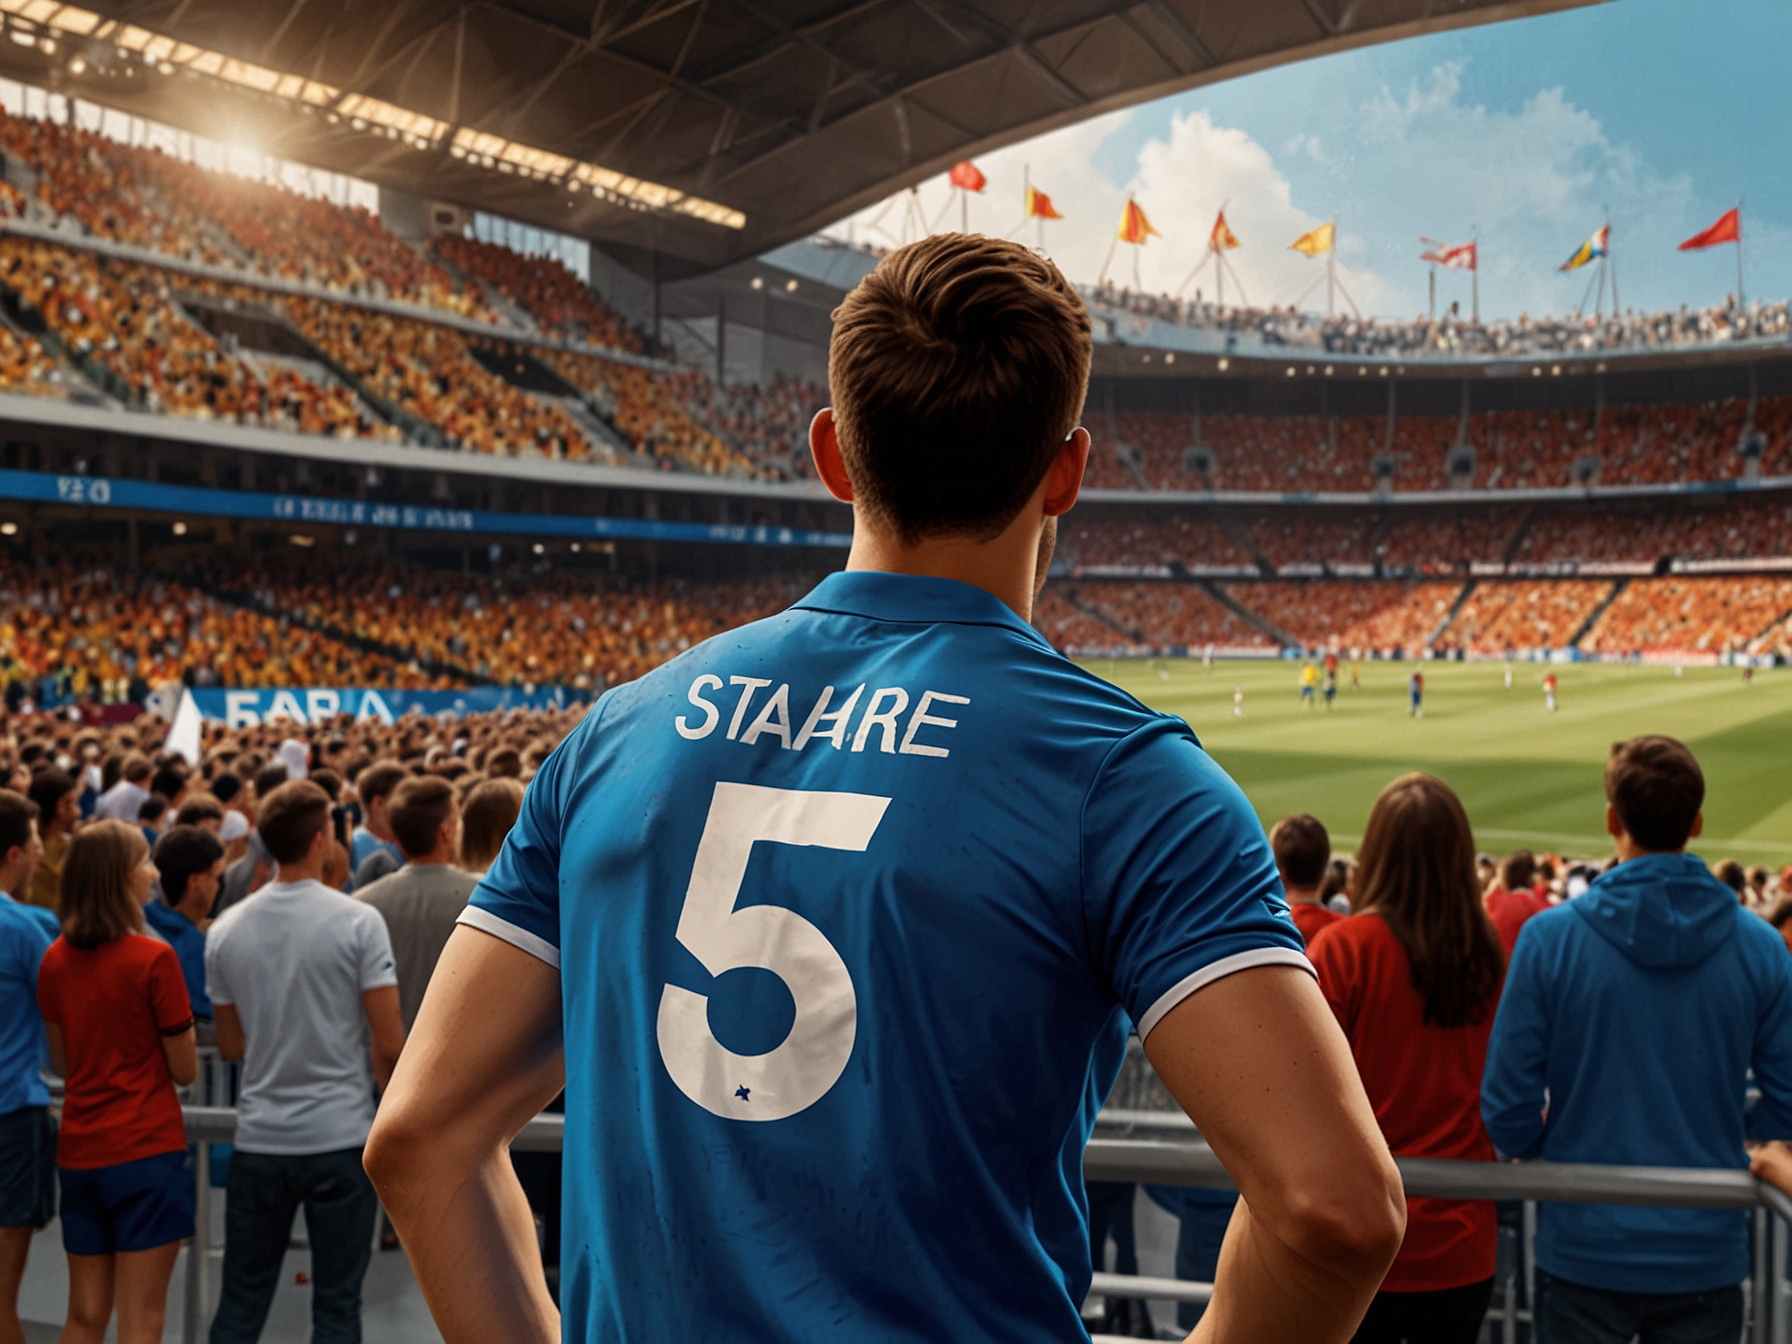 A vibrant scene from the Waldstadion in Frankfurt, where Belgium and Slovakia fans eagerly await the start of their Group E Euro 2024 match.